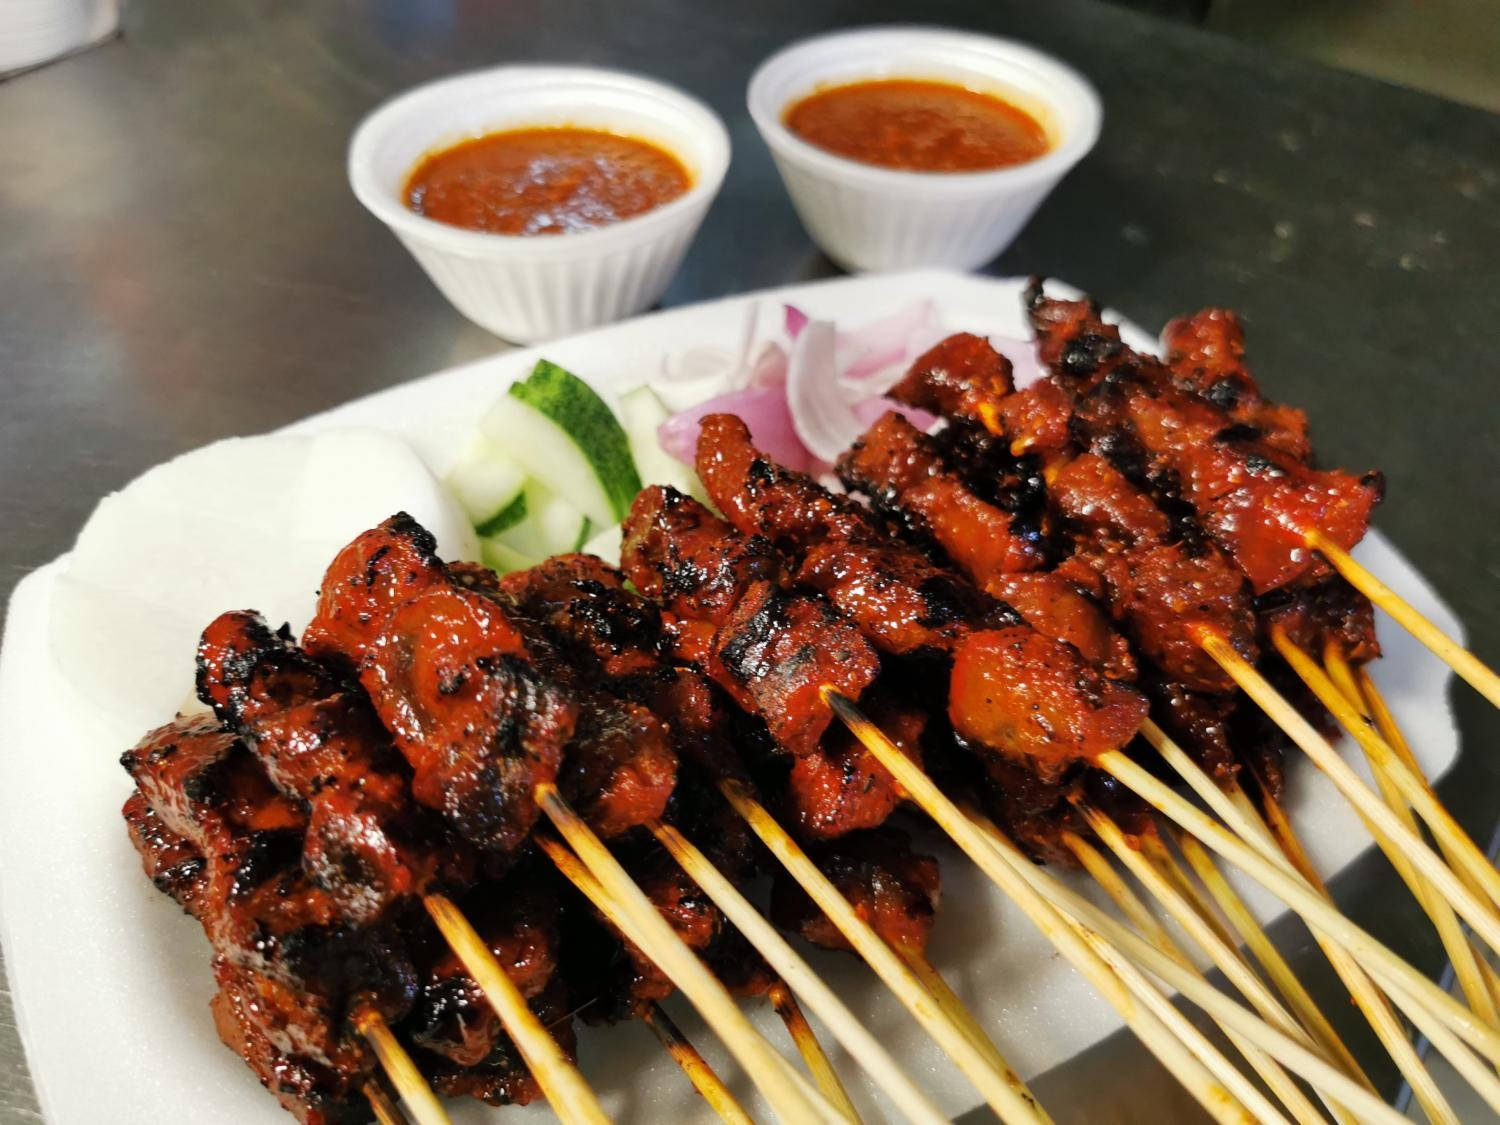 "Delicious Satay Selection with Refreshing Cucumber Salad on the Side" Wallpaper